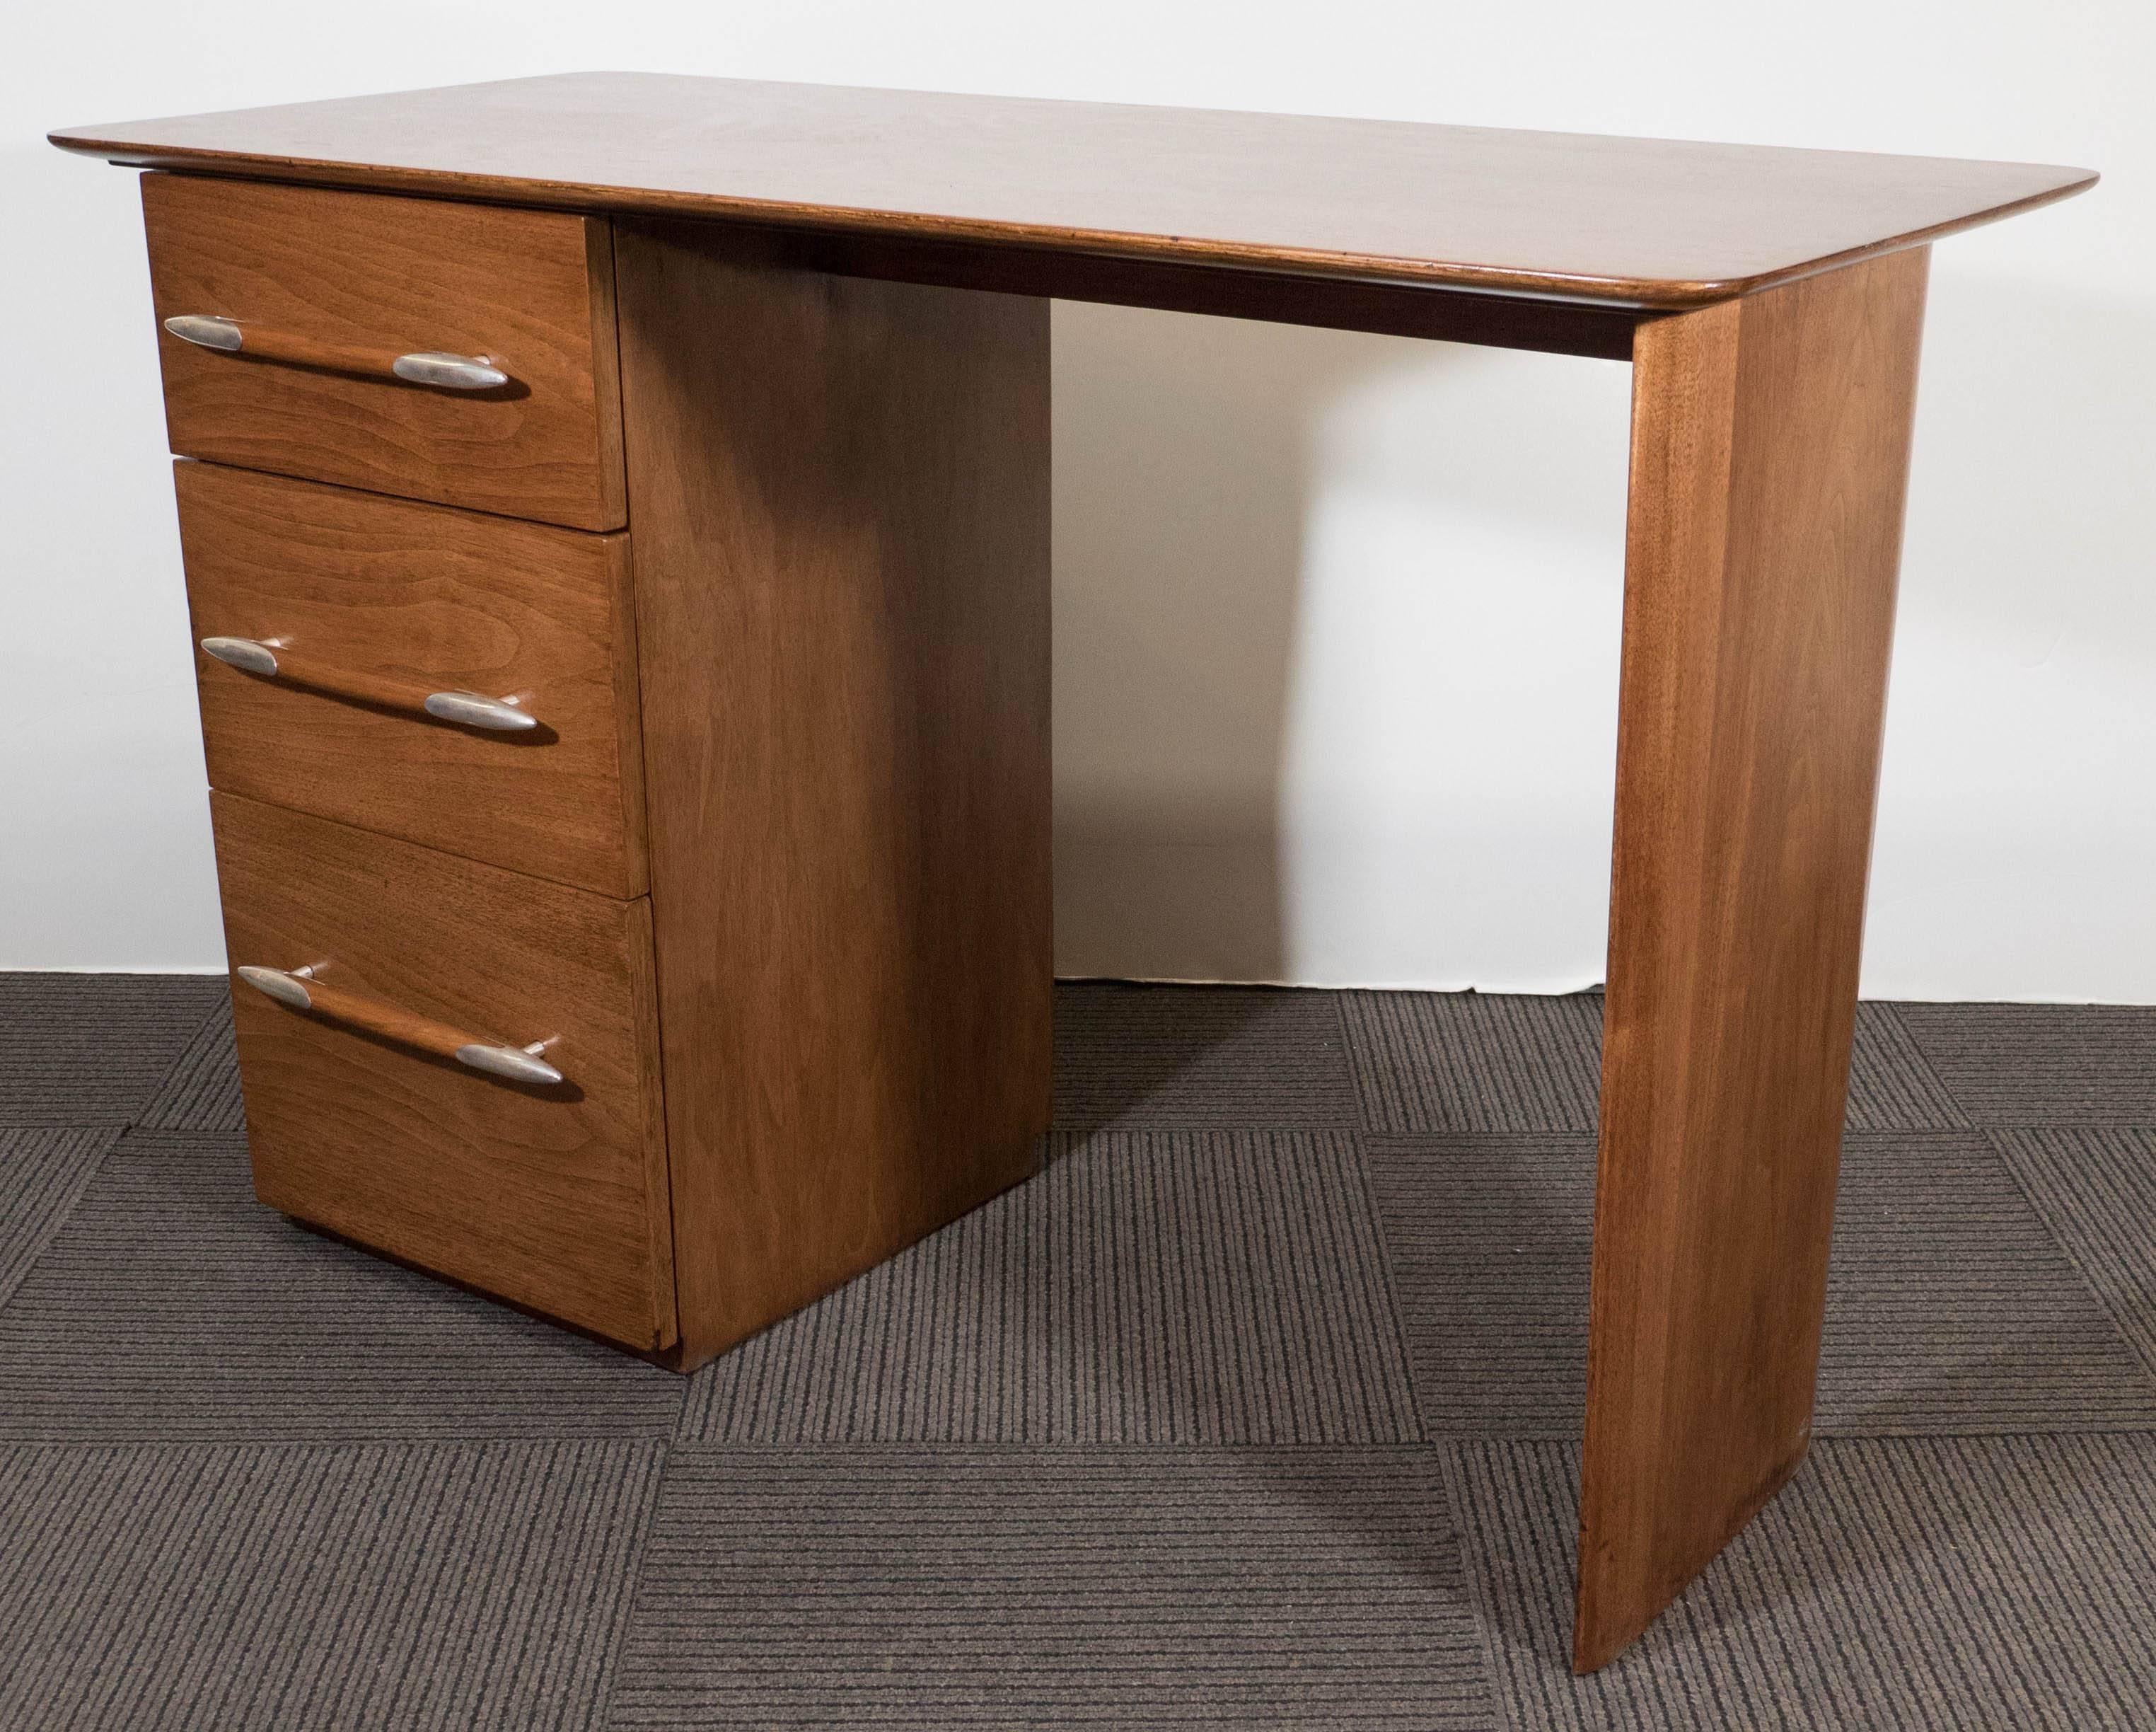 This vintage wooden desk by designer T.H. Robsjohn-Gibbings for Widdicomb Furniture Co., circa 1950s, comes with round cornered table top, above three graduated drawers, each with pull handle, tapered to either end and accented in polished metal